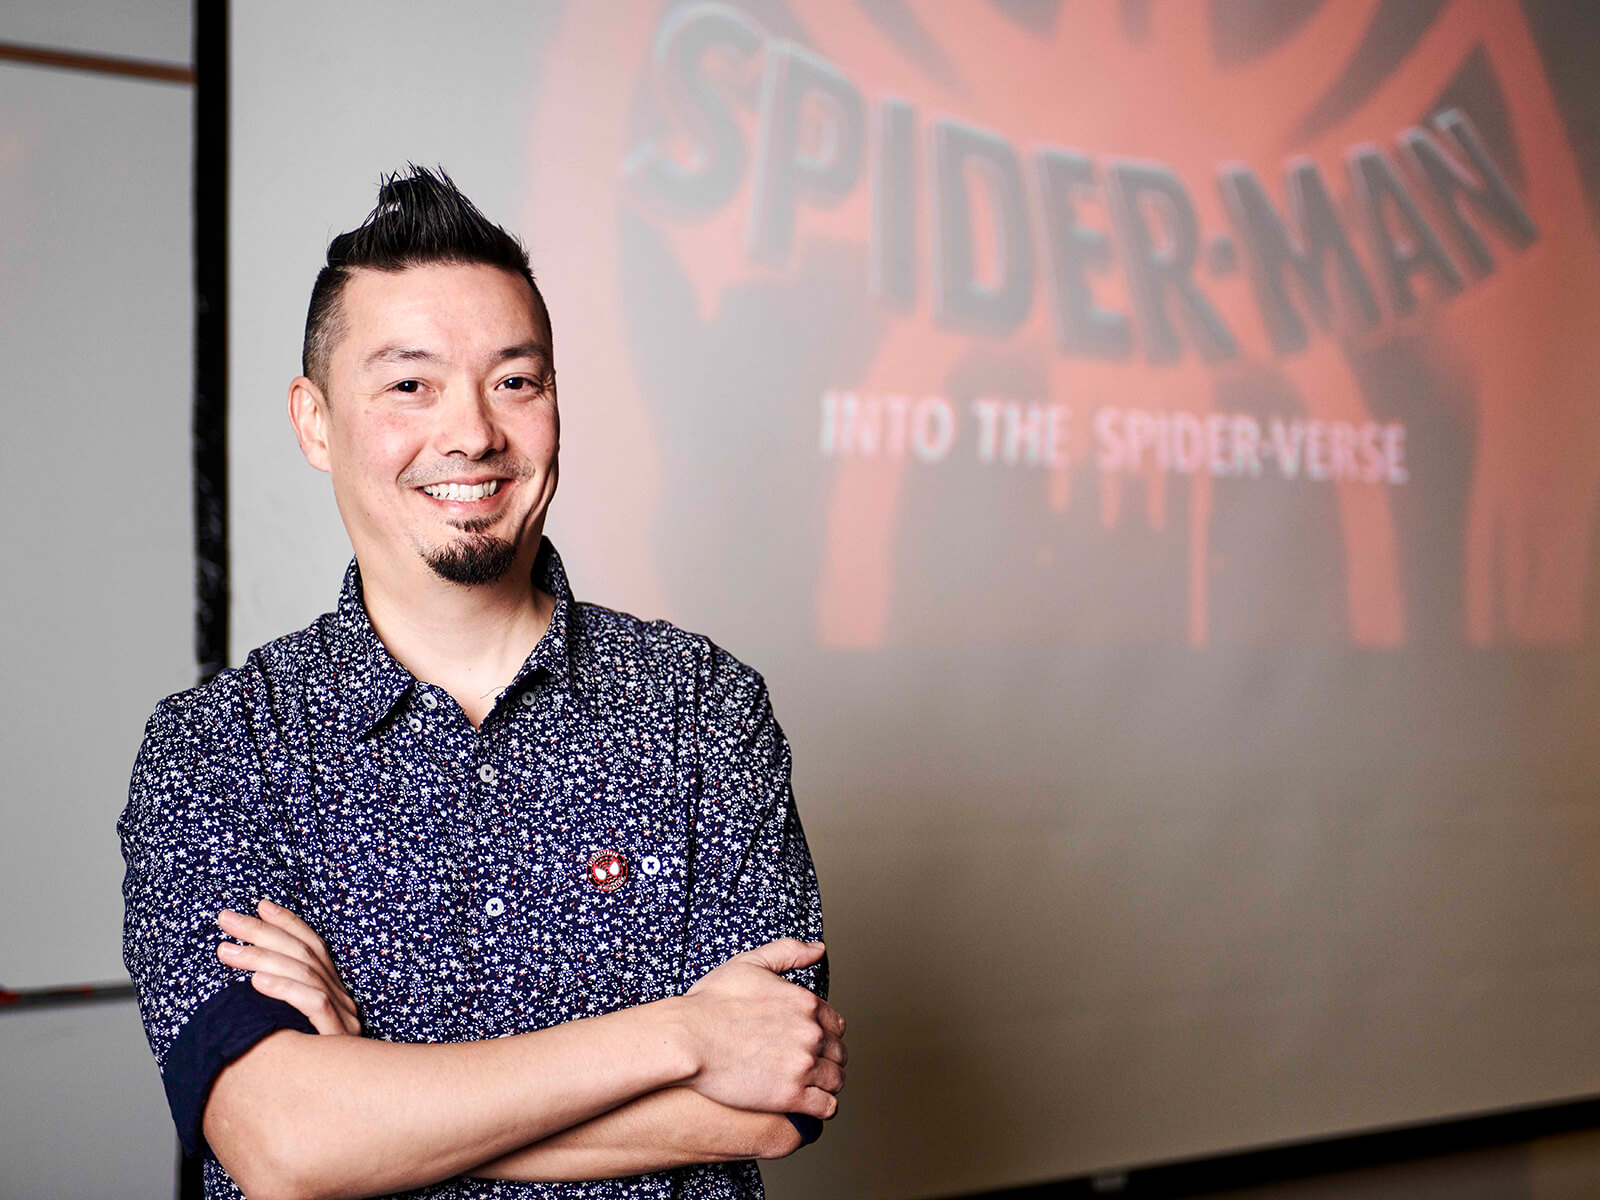 Nick Kondo smiles in front of a projection of Spider-Man: Into the Spider-Verse’s title card.